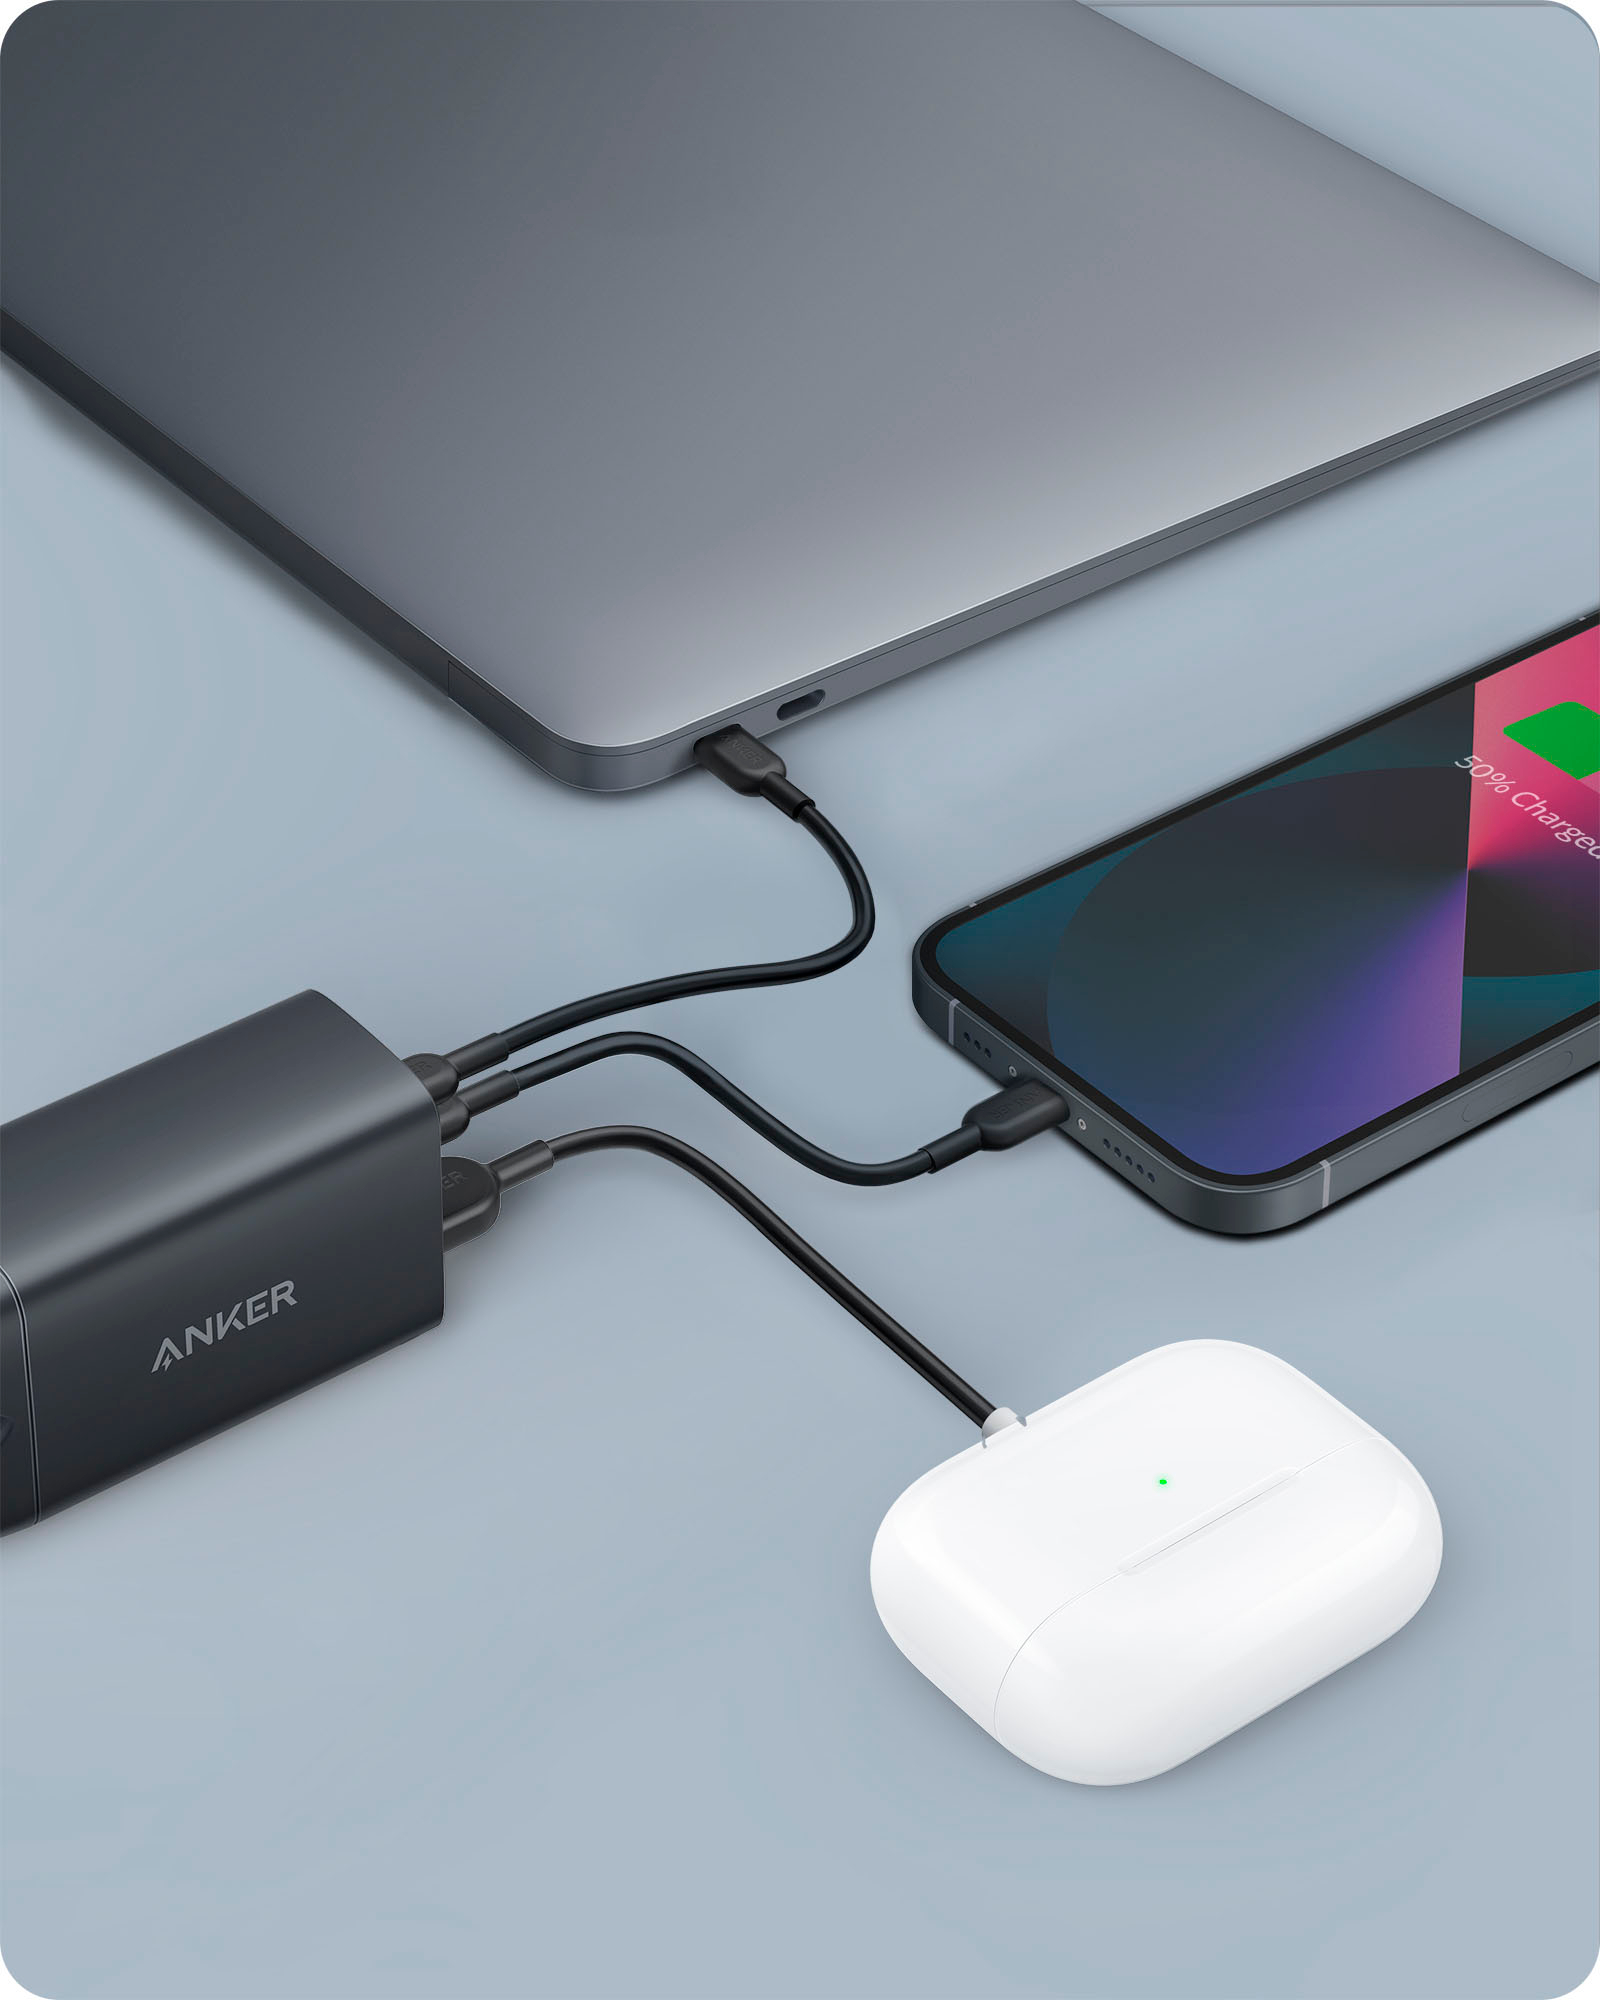 Anker's tiny 65W GaN Charger compresses a laptop charging brick to